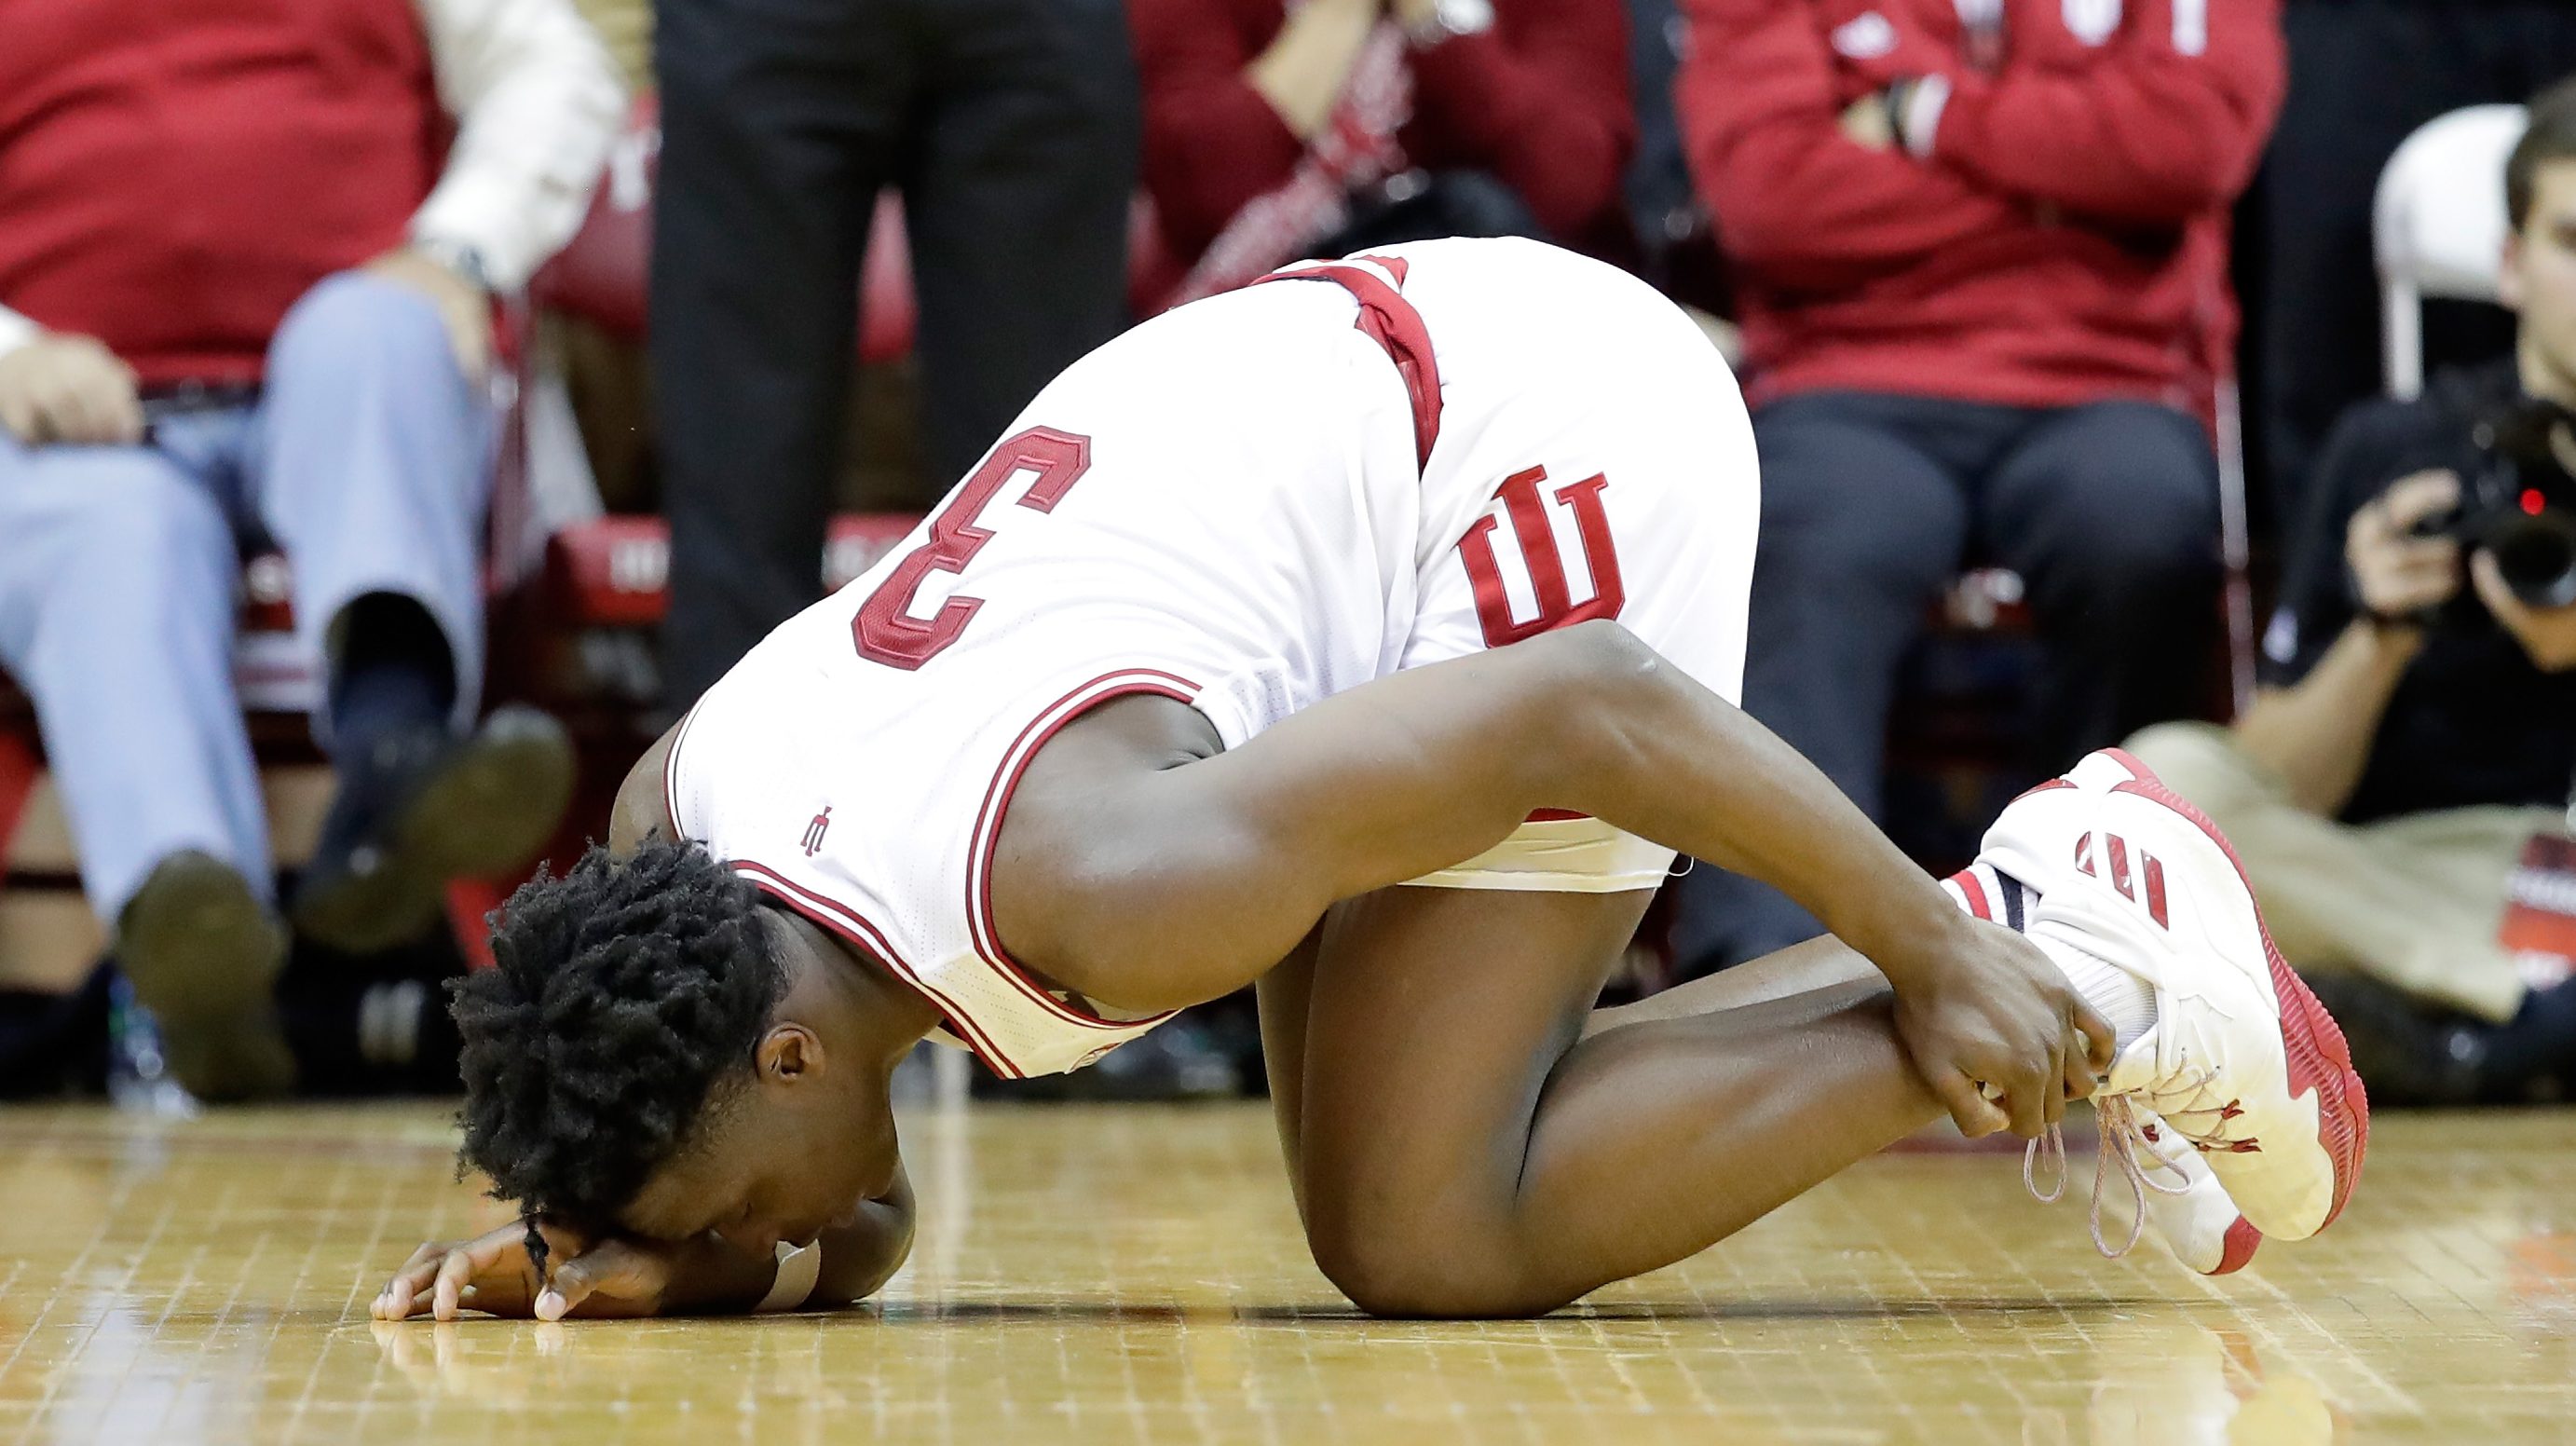 BLOOMINGTON, IN - NOVEMBER 30: O G Anunoby #3 of the Indiana Hoosiers grabs his ankle after being injured during the game against the North Carolina Tar Heels at Assembly Hall on November 30, 2016 in Bloomington, Indiana. (Photo by Andy Lyons/Getty Images)